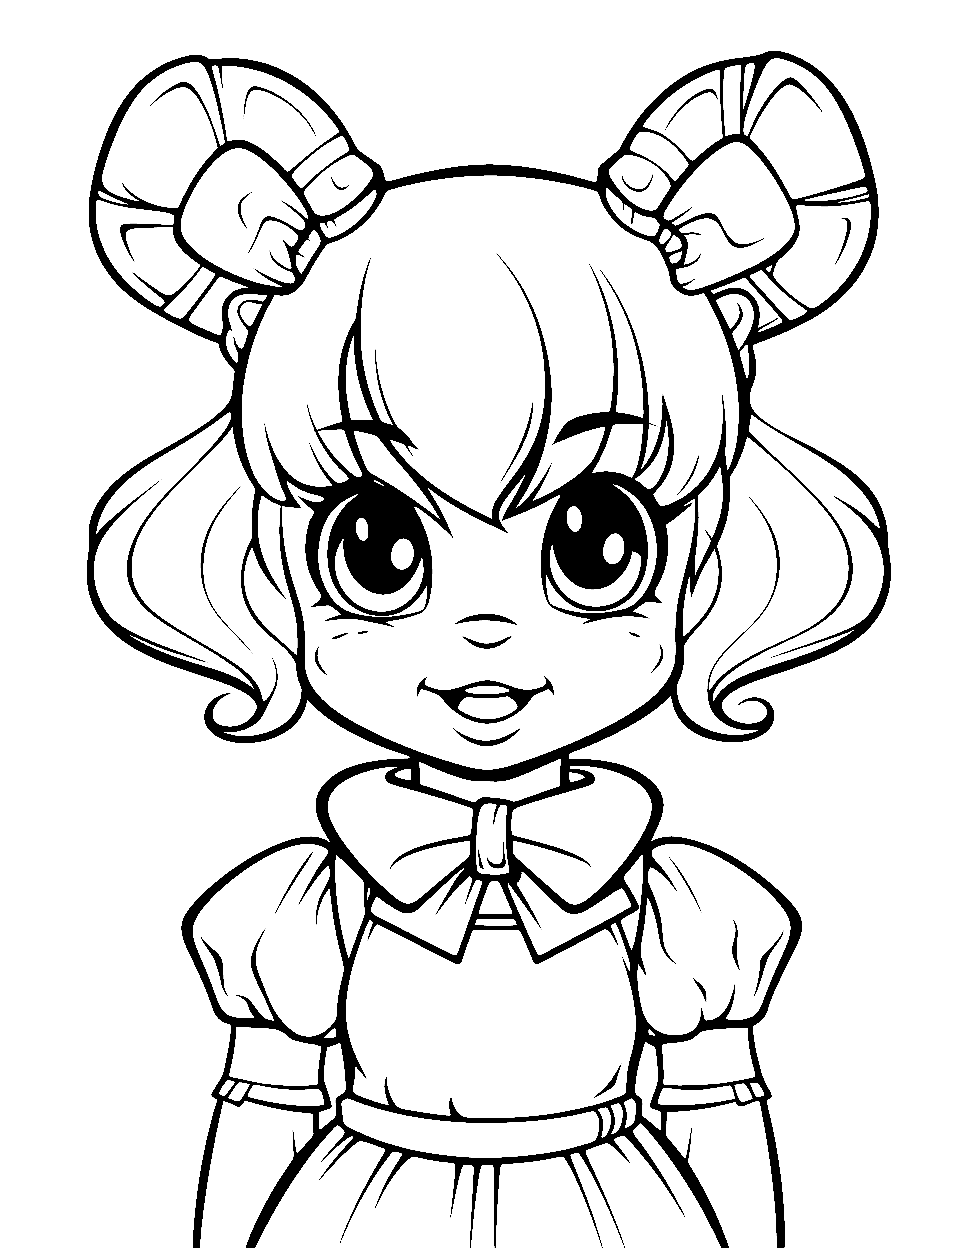 Anime Style Bonnie Coloring Page - Bonnie represented in a cute anime style.